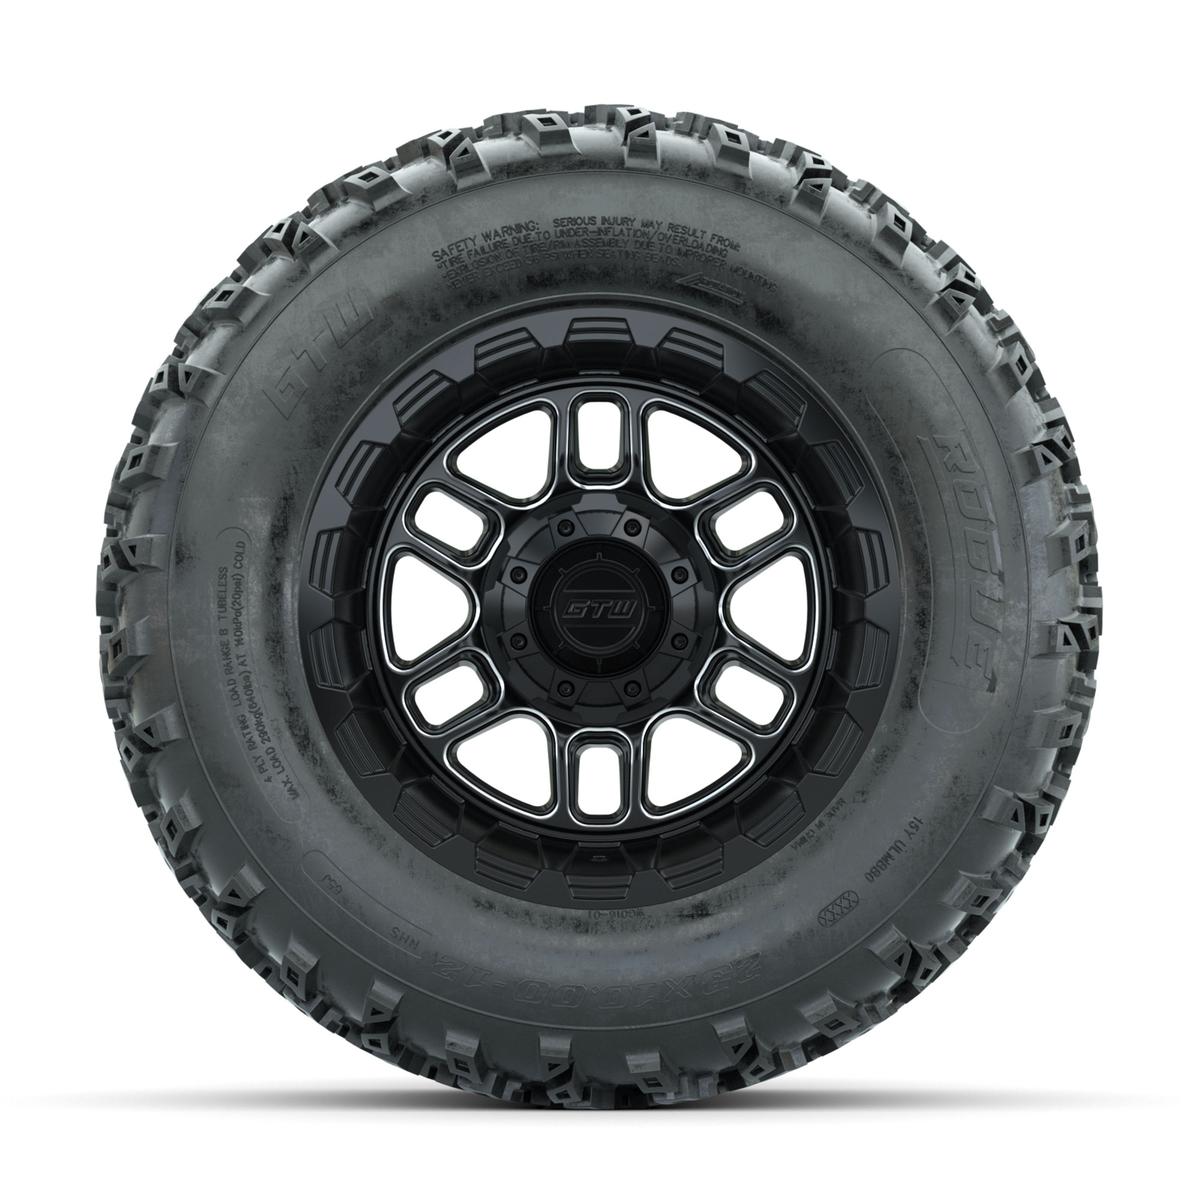 GTW Titan Machined/Black 12 in Wheels with 23x10.00-12 Rogue All Terrain Tires – Full Set